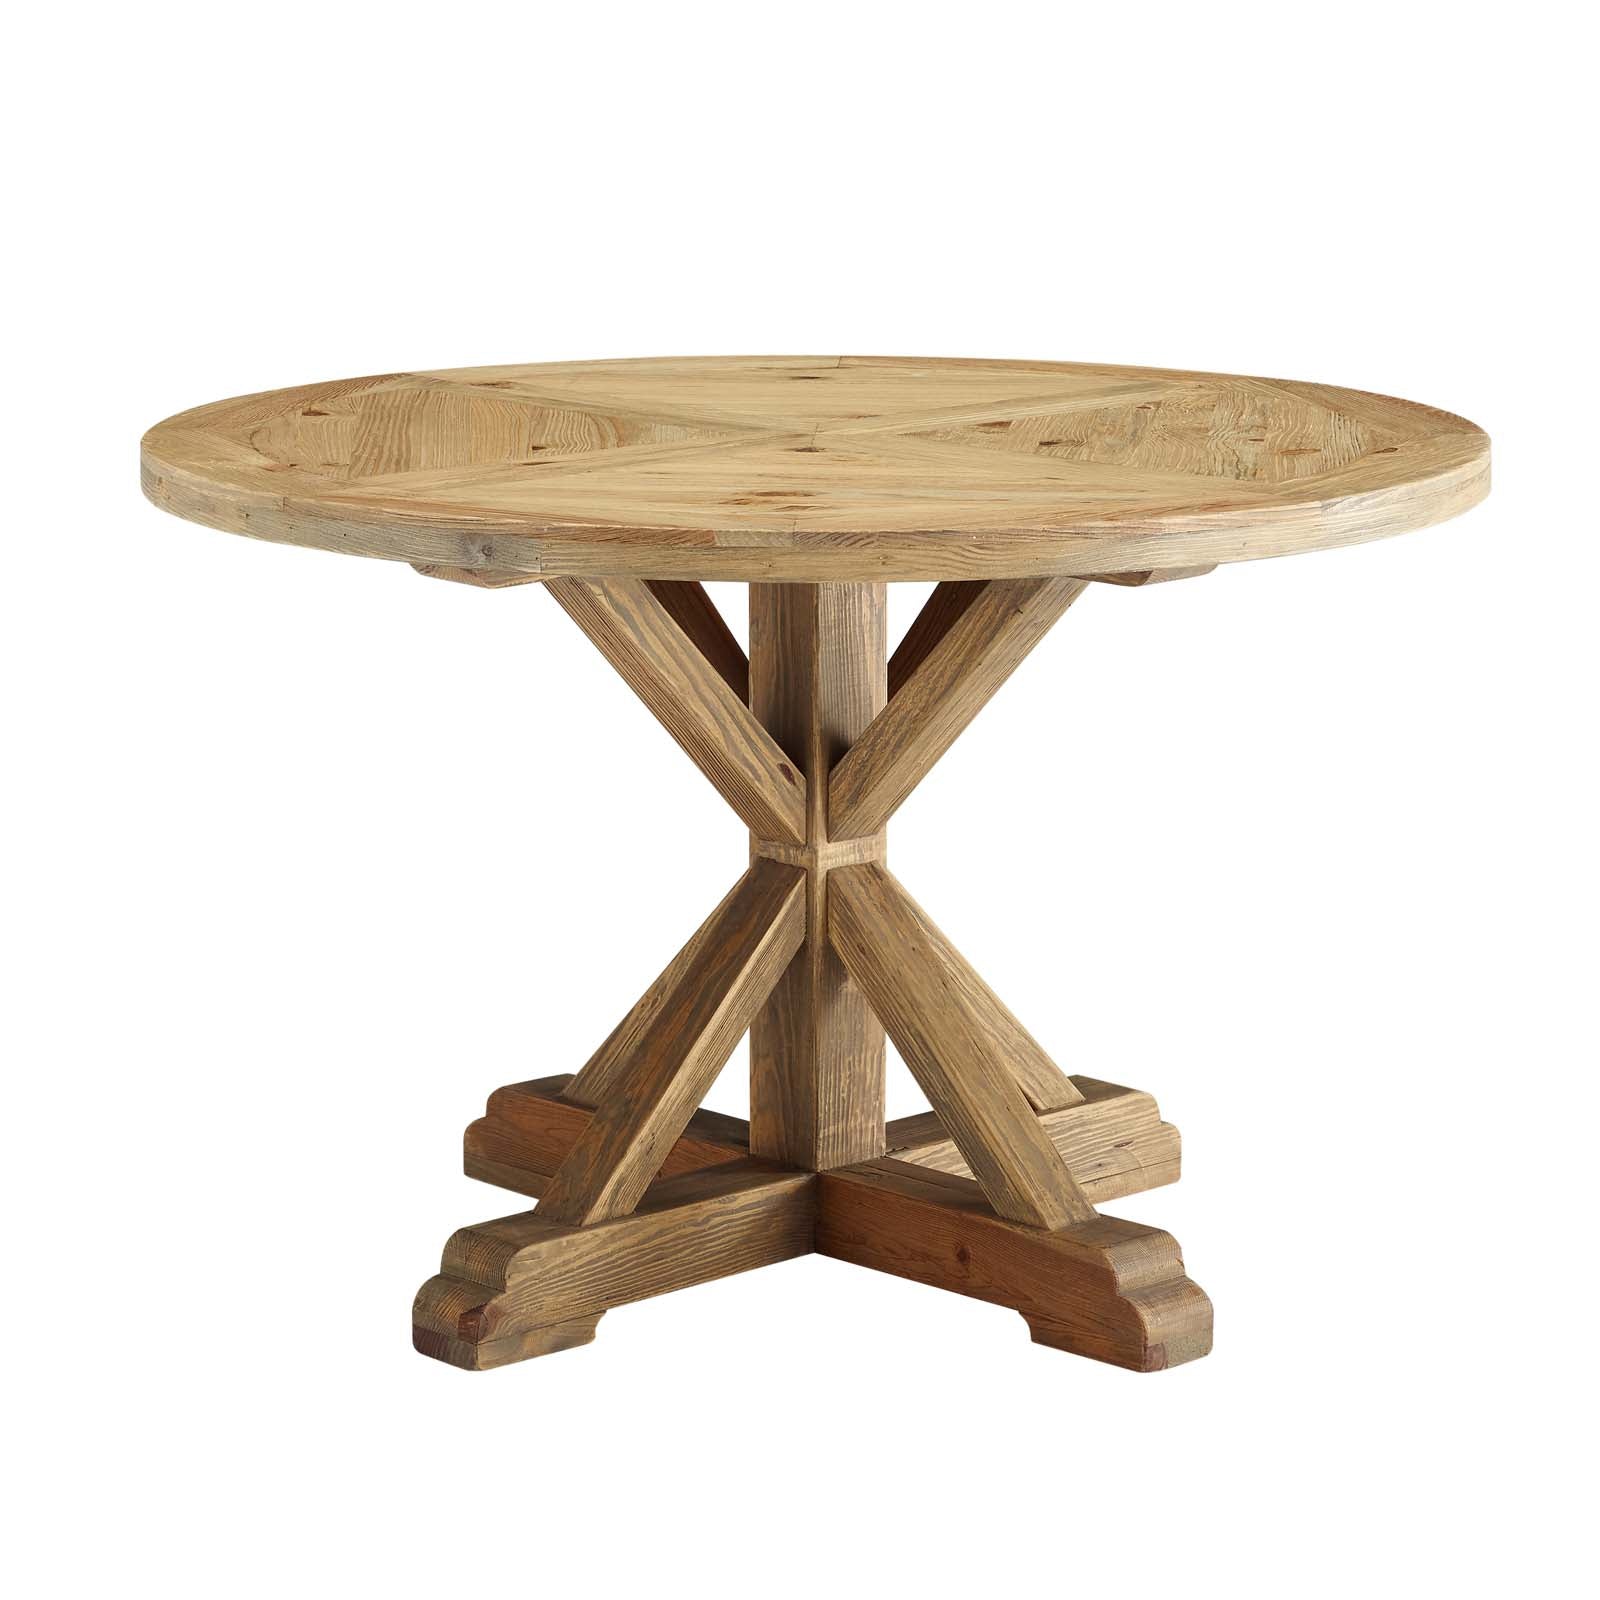 Stitch 47" Round Pine Wood Dining Table - East Shore Modern Home Furnishings